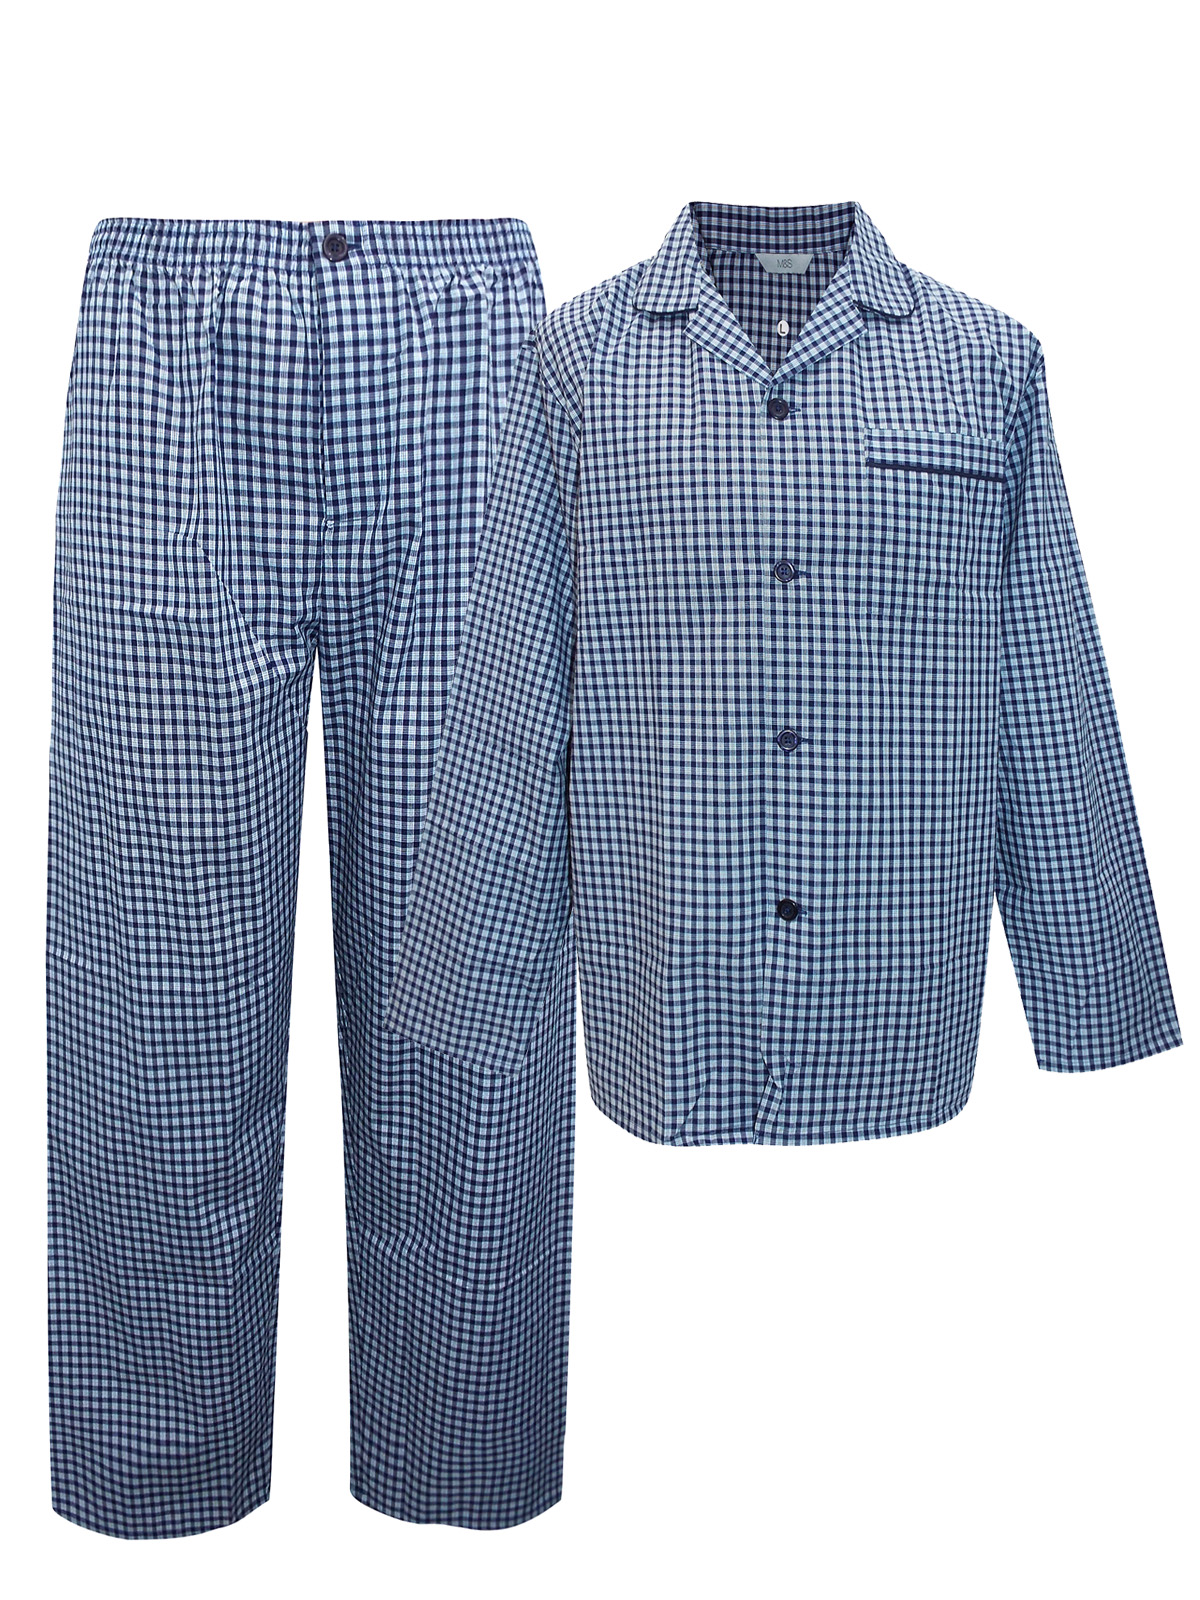 Marks and Spencer - - M&5 NAVY Mens Cotton Blend Checked Pyjamas - Size ...